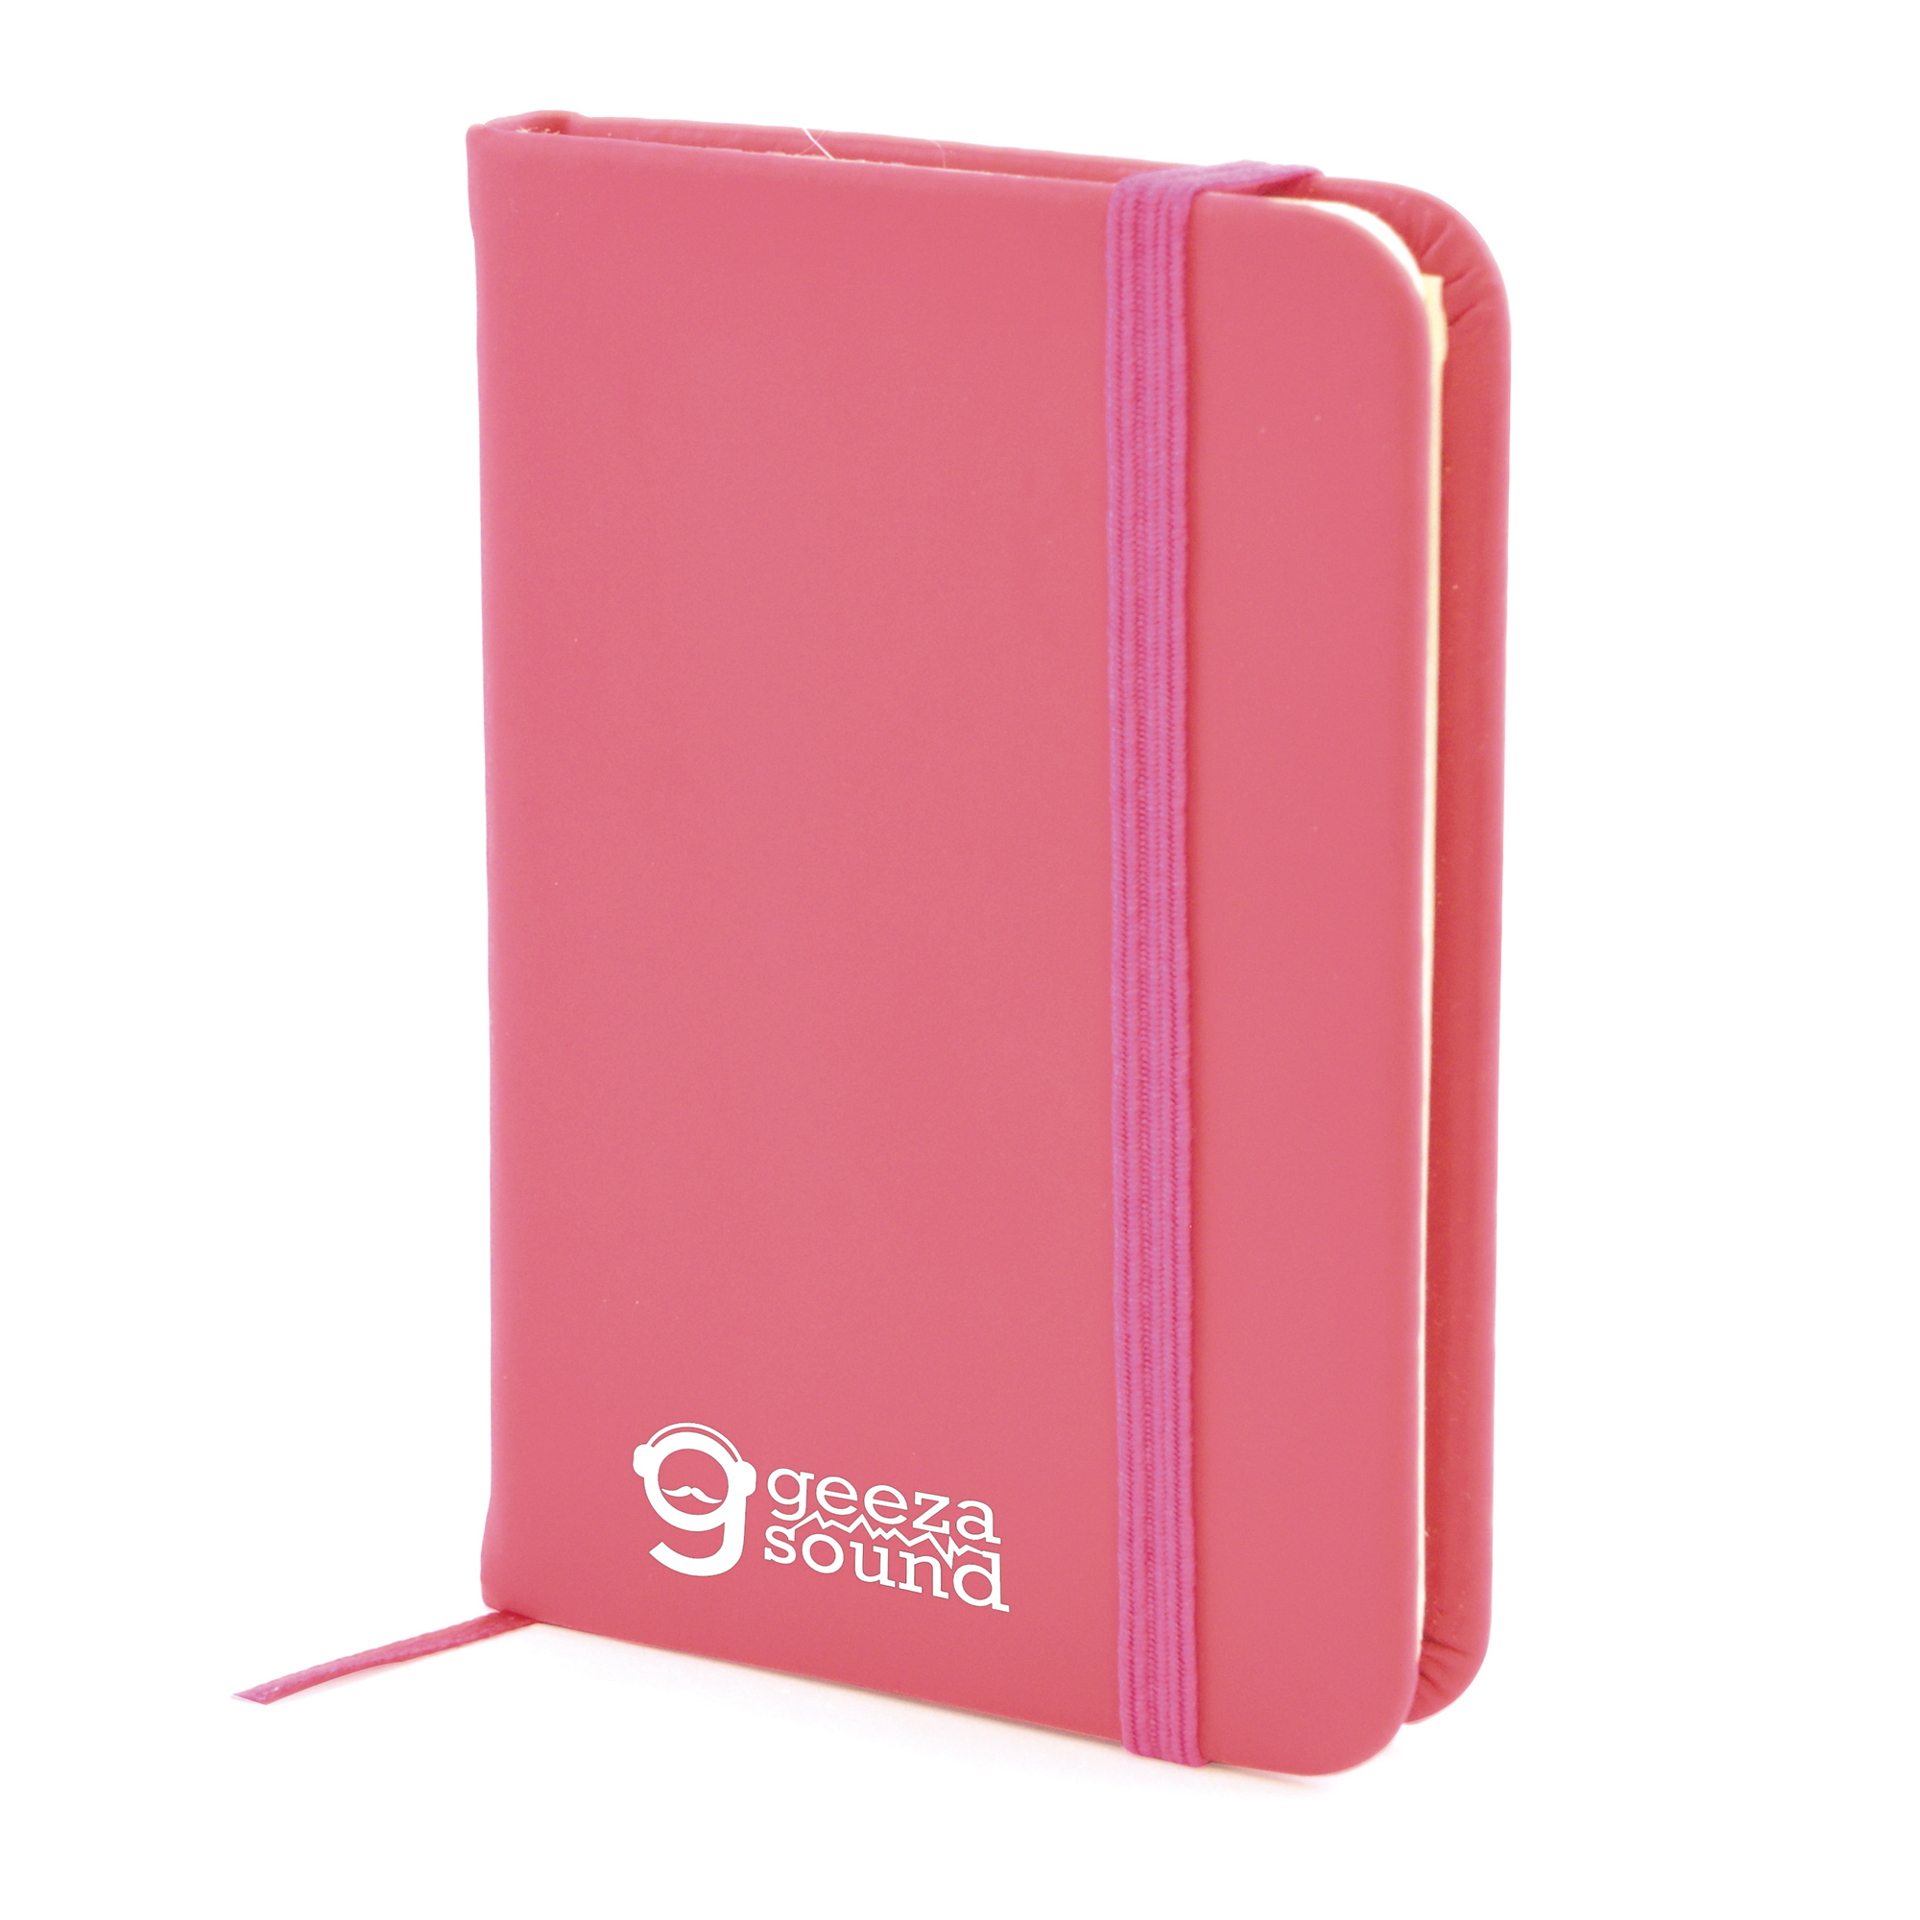 A7 Notebook in pink with colour match book mark, pen loop and elastic closure strap and 1 colour print logo